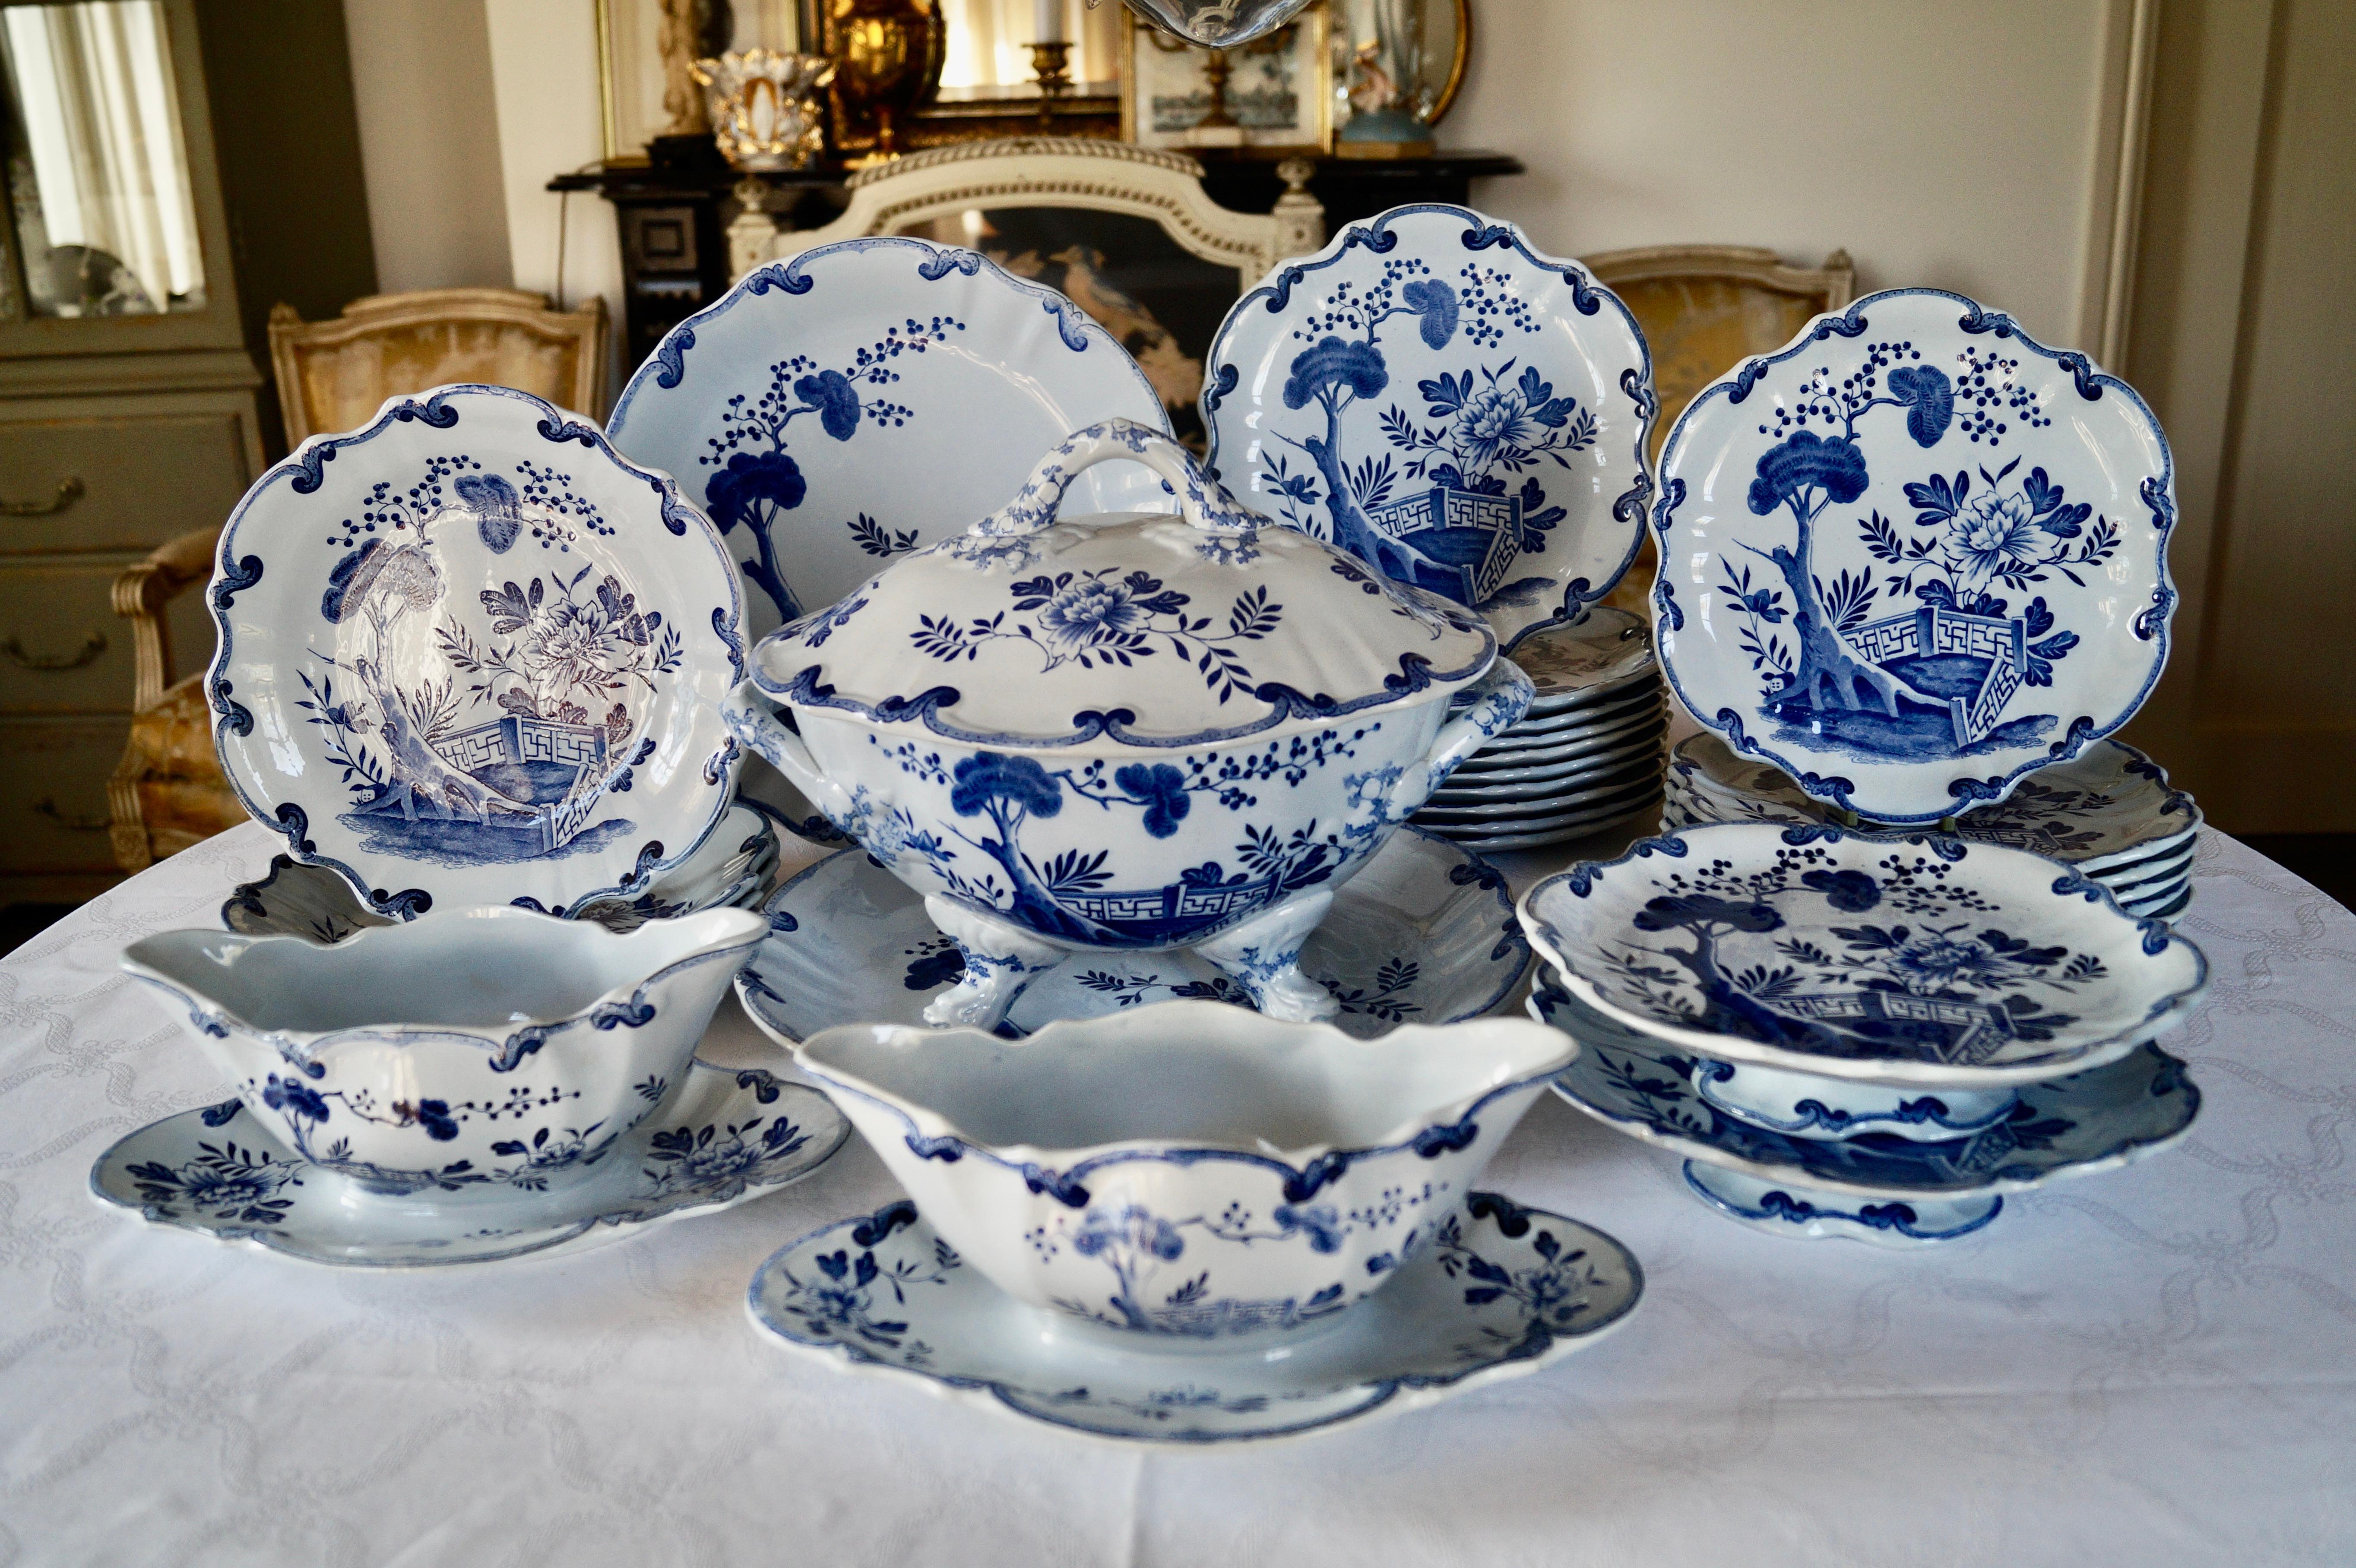 Very special and rare this pieces of antique tableware by Creil et Montereau de Terre de Fer service with chinoiserie pattern called 